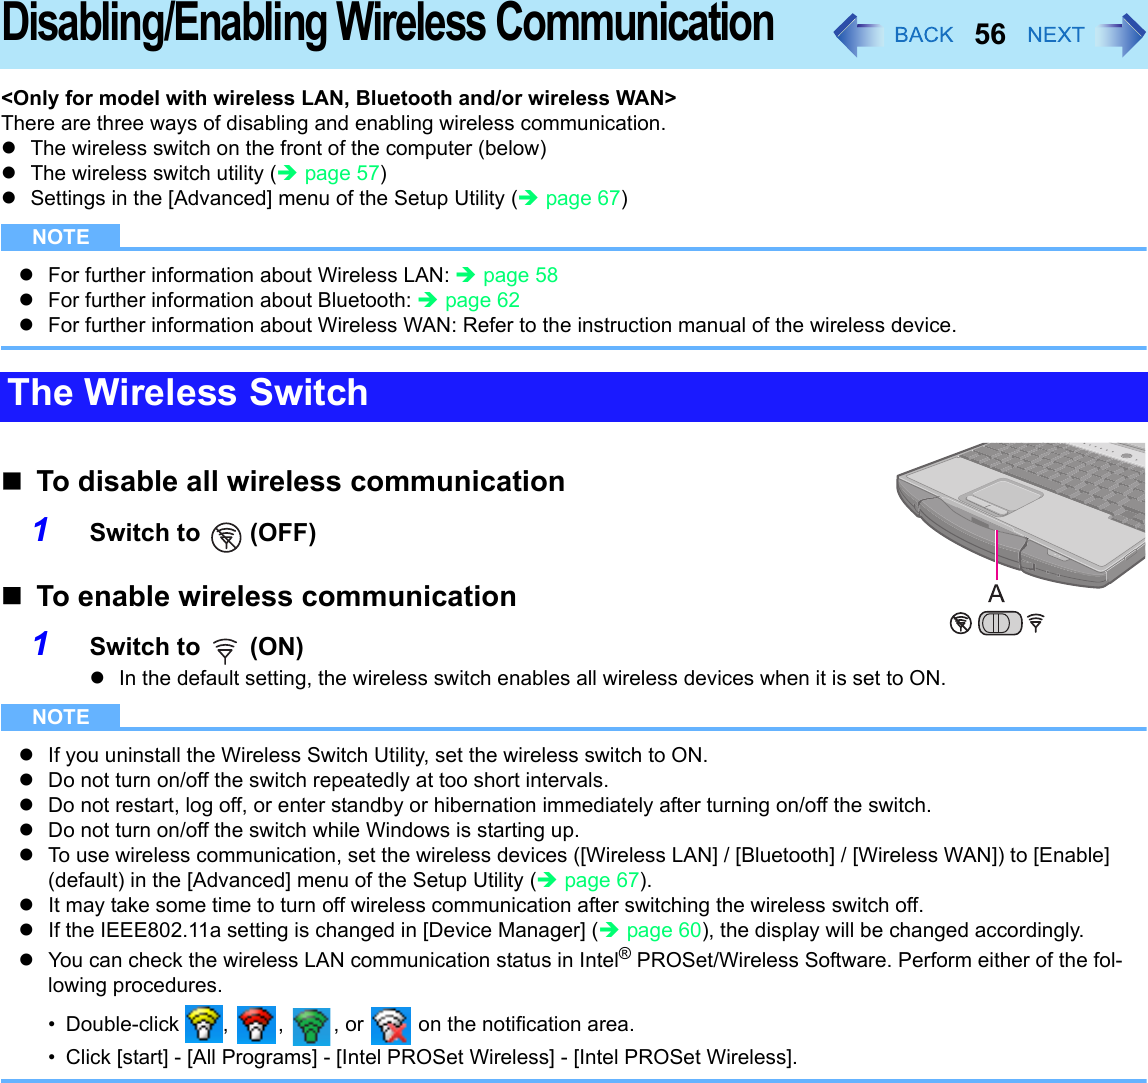 56Disabling/Enabling Wireless Communication&lt;Only for model with wireless LAN, Bluetooth and/or wireless WAN&gt;There are three ways of disabling and enabling wireless communication. zThe wireless switch on the front of the computer (below) zThe wireless switch utility (Îpage 57)zSettings in the [Advanced] menu of the Setup Utility (Îpage 67)NOTEzFor further information about Wireless LAN: Îpage 58zFor further information about Bluetooth: Îpage 62zFor further information about Wireless WAN: Refer to the instruction manual of the wireless device.To disable all wireless communication1Switch to   (OFF)To enable wireless communication1Switch to   (ON)zIn the default setting, the wireless switch enables all wireless devices when it is set to ON.NOTEzIf you uninstall the Wireless Switch Utility, set the wireless switch to ON.zDo not turn on/off the switch repeatedly at too short intervals.zDo not restart, log off, or enter standby or hibernation immediately after turning on/off the switch.zDo not turn on/off the switch while Windows is starting up.zTo use wireless communication, set the wireless devices ([Wireless LAN] / [Bluetooth] / [Wireless WAN]) to [Enable] (default) in the [Advanced] menu of the Setup Utility (Îpage 67).zIt may take some time to turn off wireless communication after switching the wireless switch off.zIf the IEEE802.11a setting is changed in [Device Manager] (Îpage 60), the display will be changed accordingly.zYou can check the wireless LAN communication status in Intel® PROSet/Wireless Software. Perform either of the fol-lowing procedures.• Double-click  ,  ,  , or   on the notification area.• Click [start] - [All Programs] - [Intel PROSet Wireless] - [Intel PROSet Wireless].The Wireless Switch